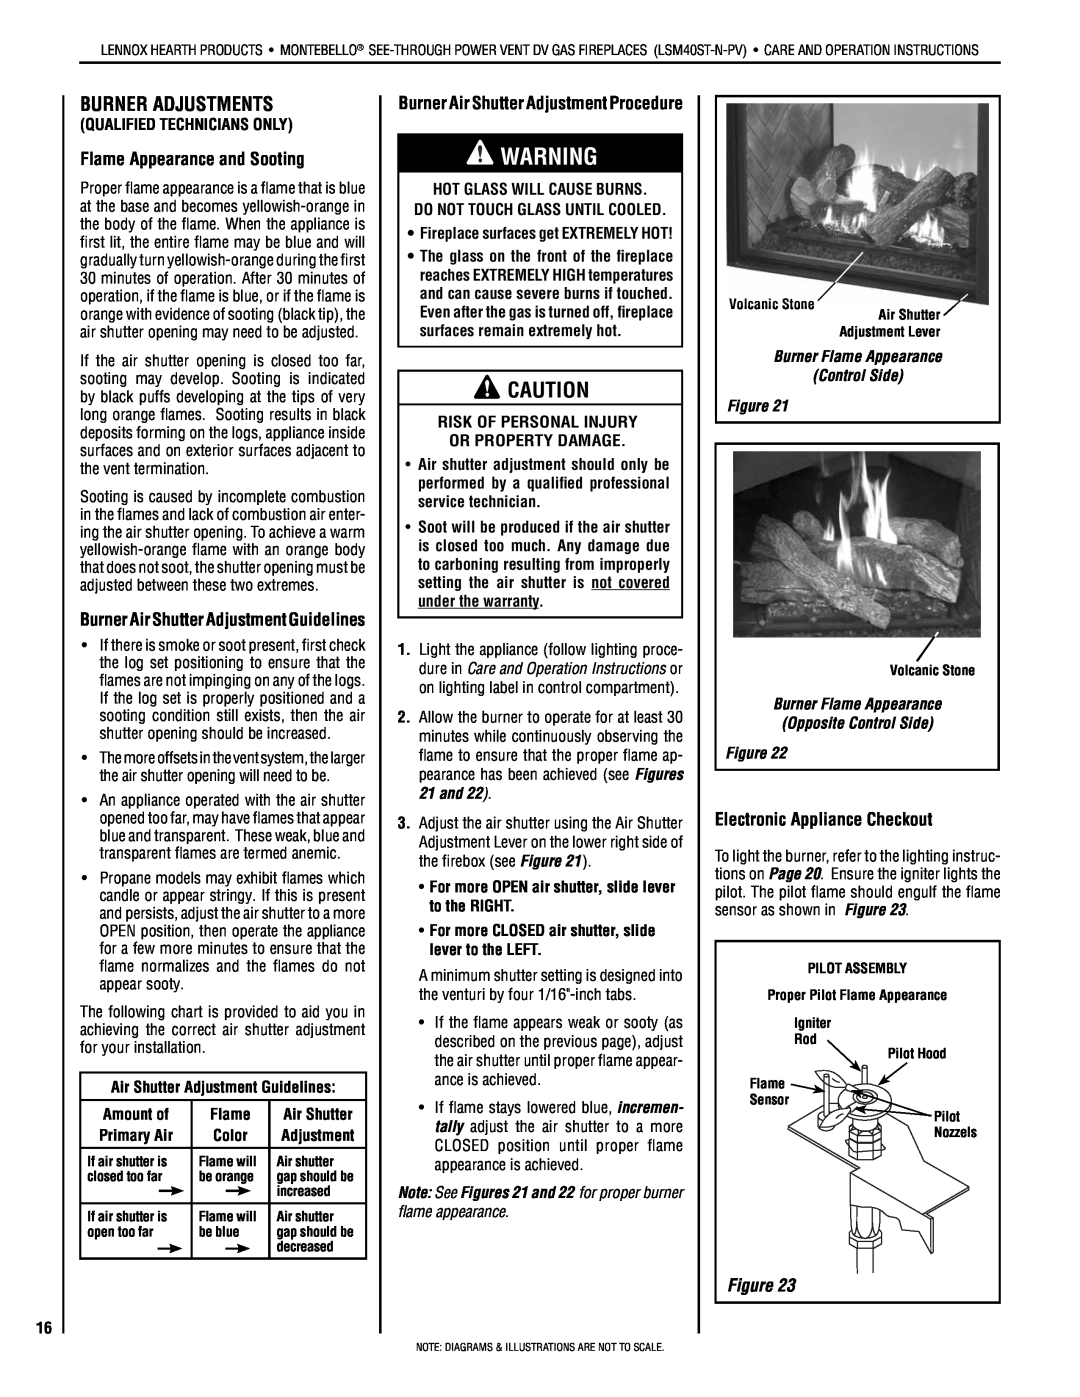 Lennox Hearth LSM40ST-N-PV installation instructions Flame Appearance and Sooting, Electronic Appliance Checkout, Figure 